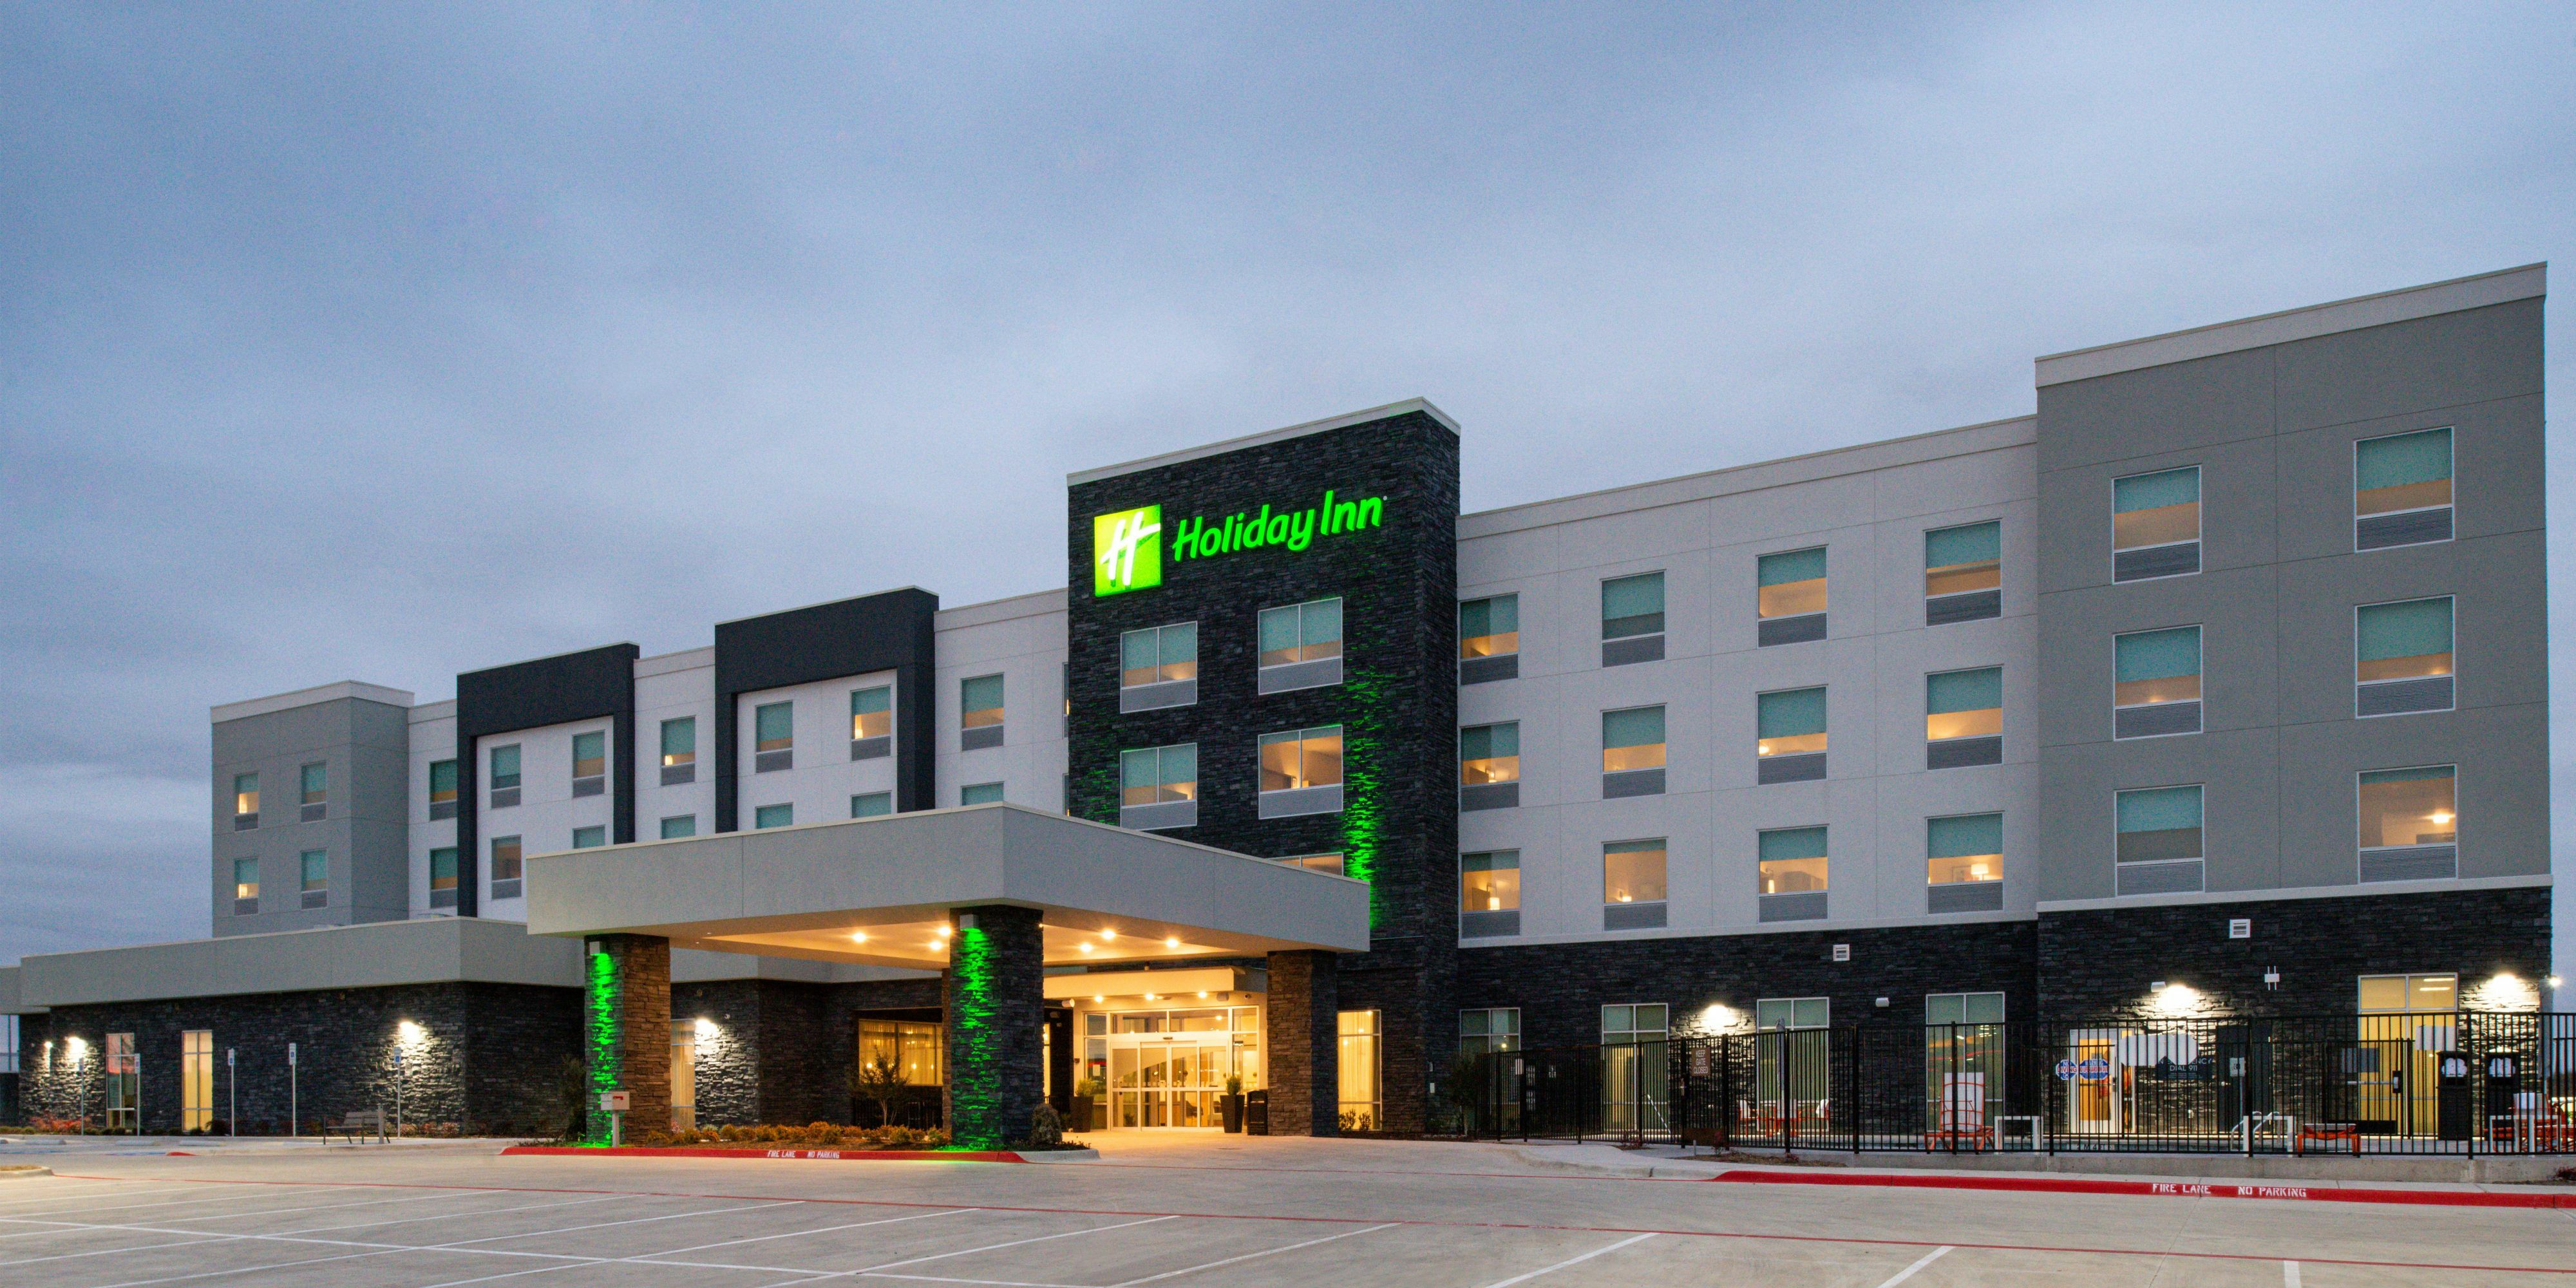 Photo of Holiday Inn Fort Worth - Alliance, Fort Worth, TX